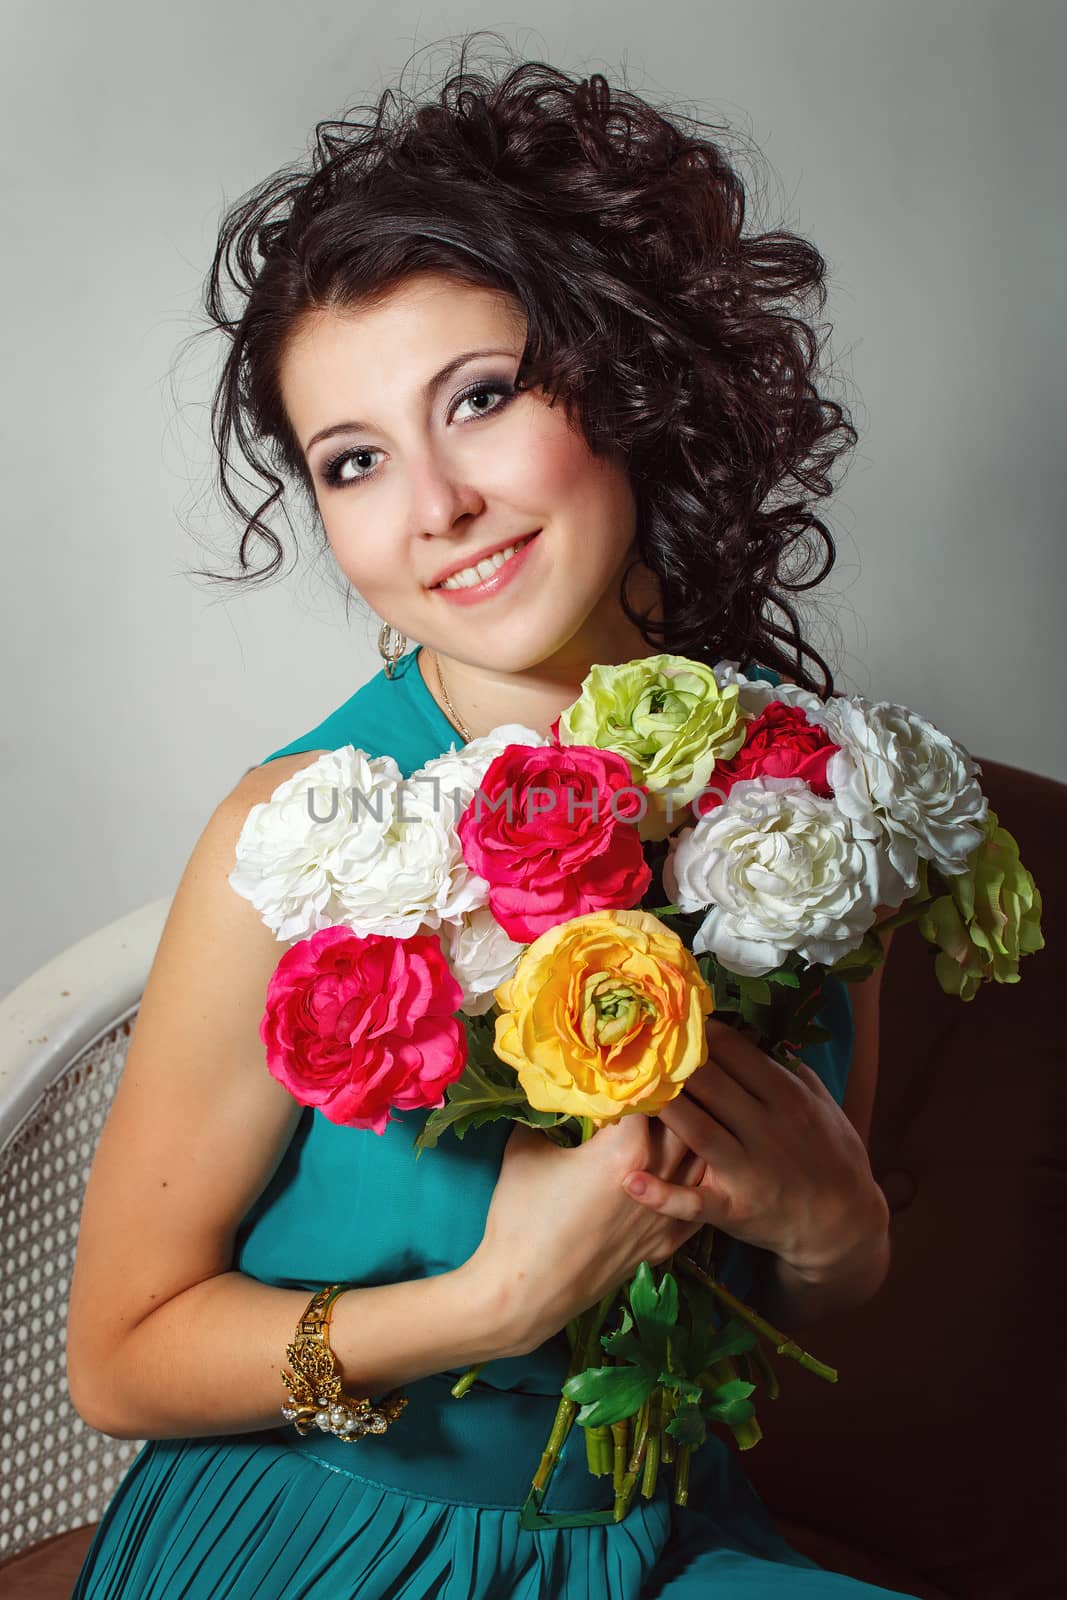 Girl in a dress holding a bouquet of flowers. Photographed in the studio